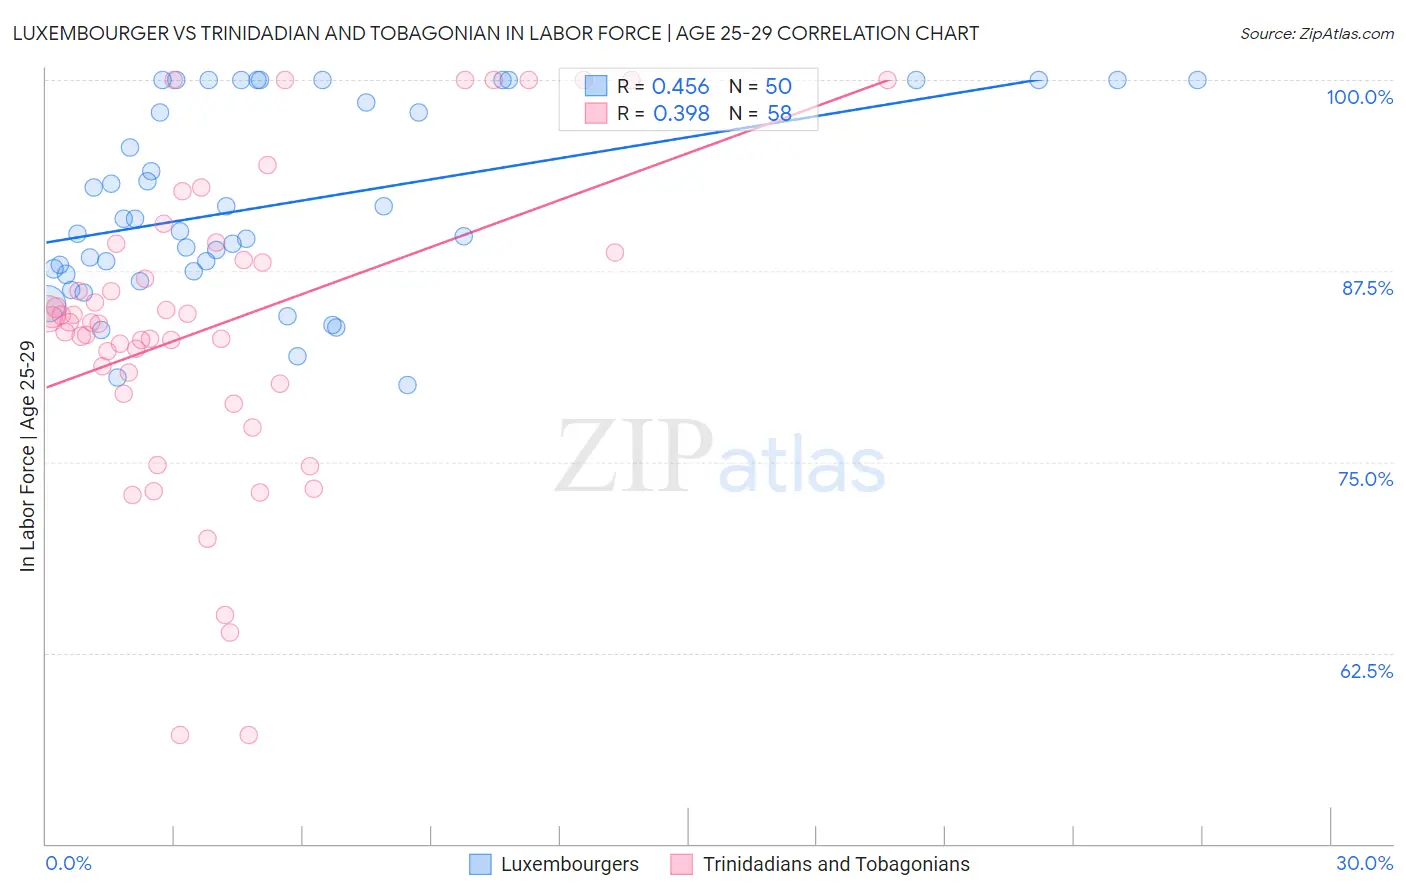 Luxembourger vs Trinidadian and Tobagonian In Labor Force | Age 25-29